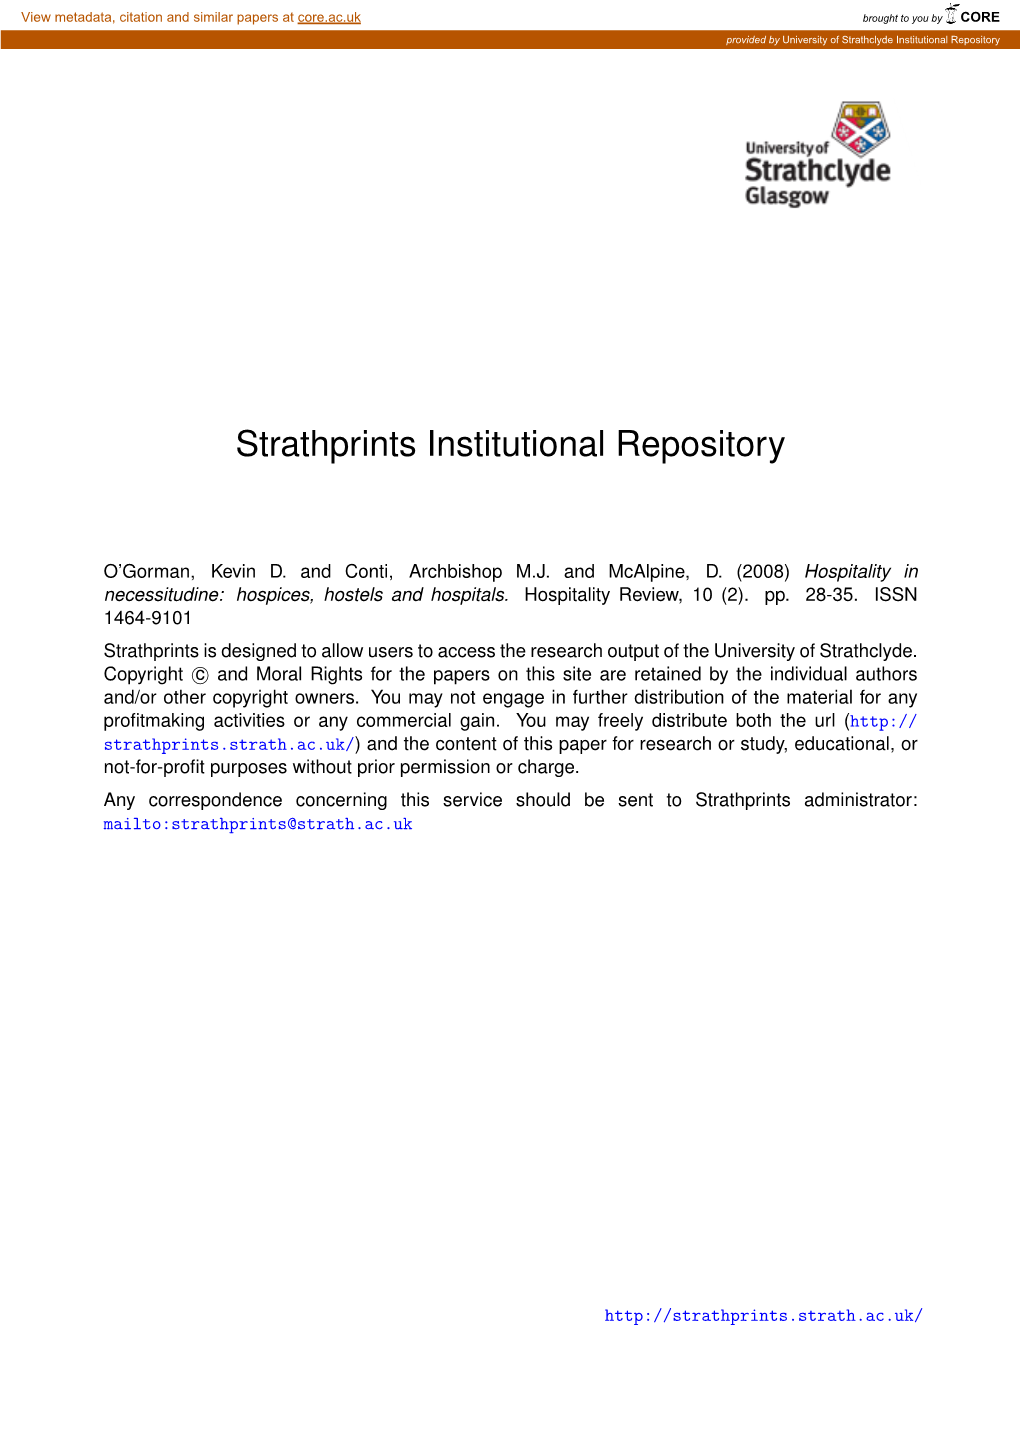 Strathprints Institutional Repository